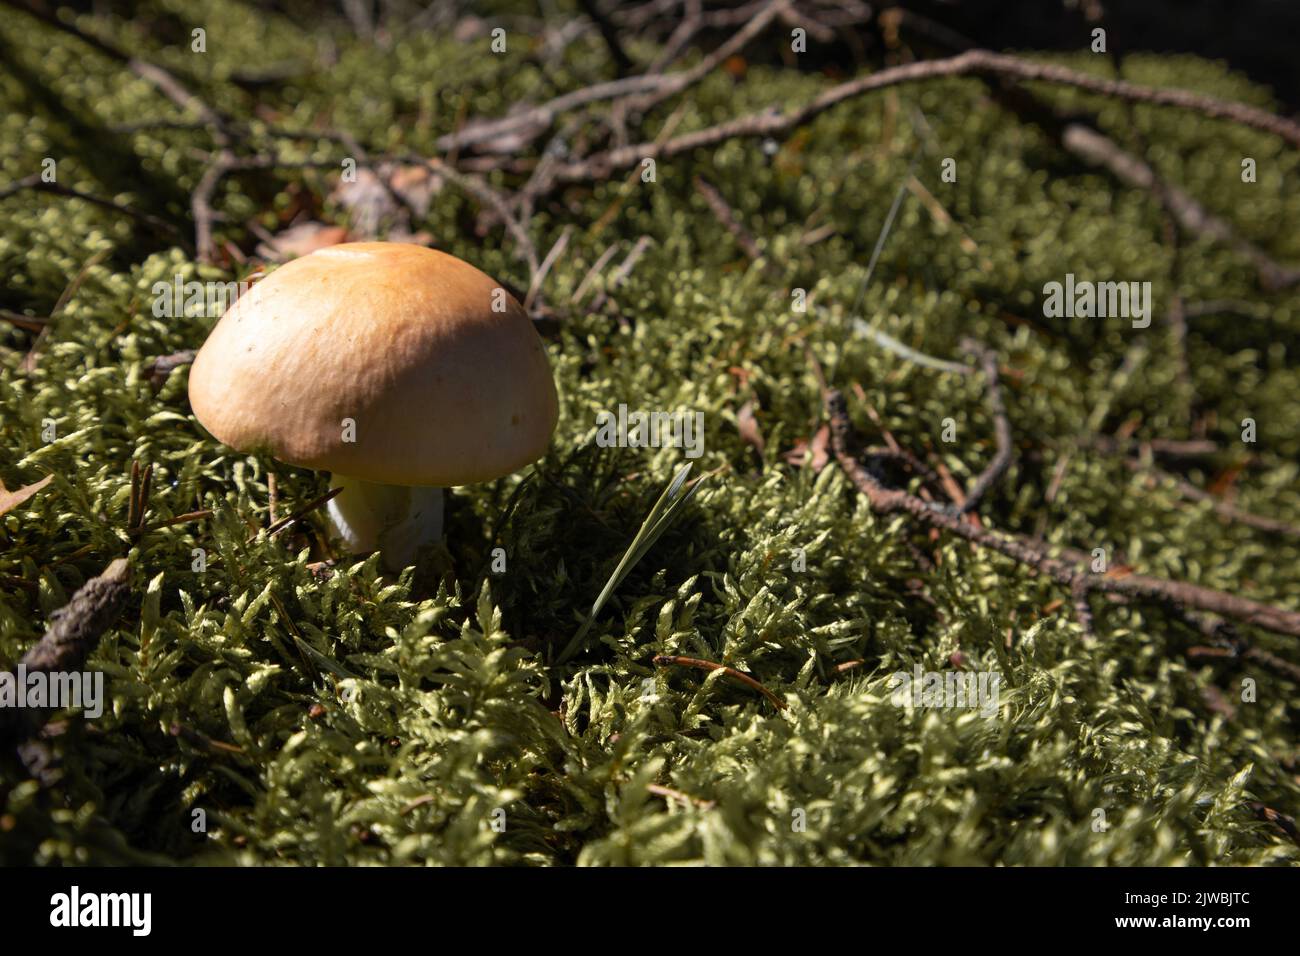 Inedible mushroom in sunny day. Beautiful close up view Stock Photo